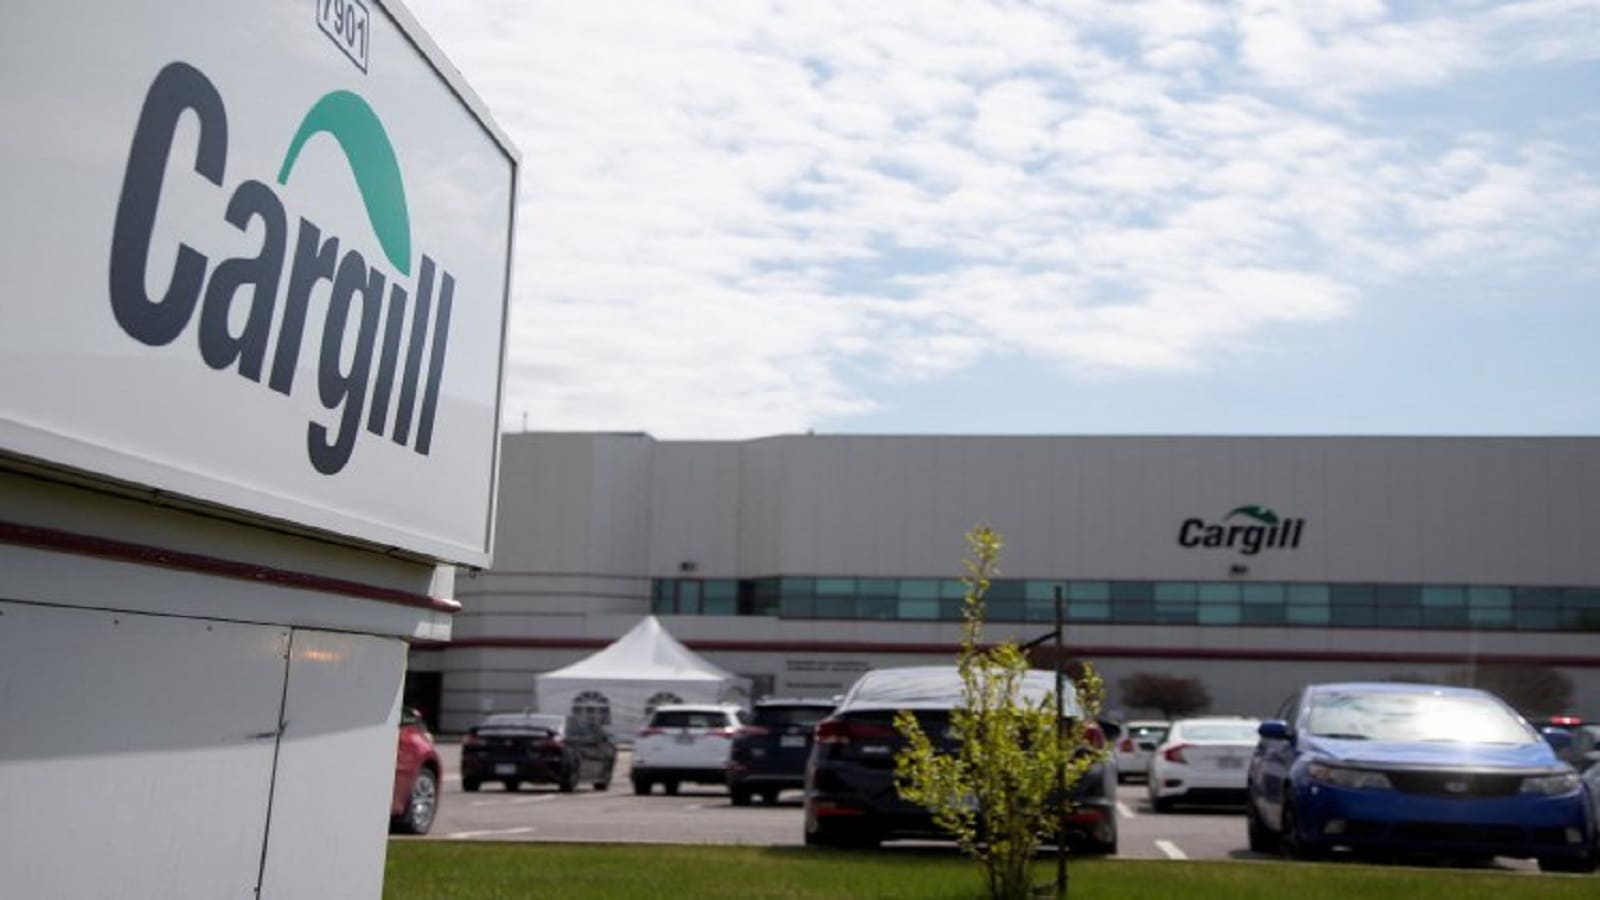 Cargill seeks to acquire soy crushing facilities in Brazil